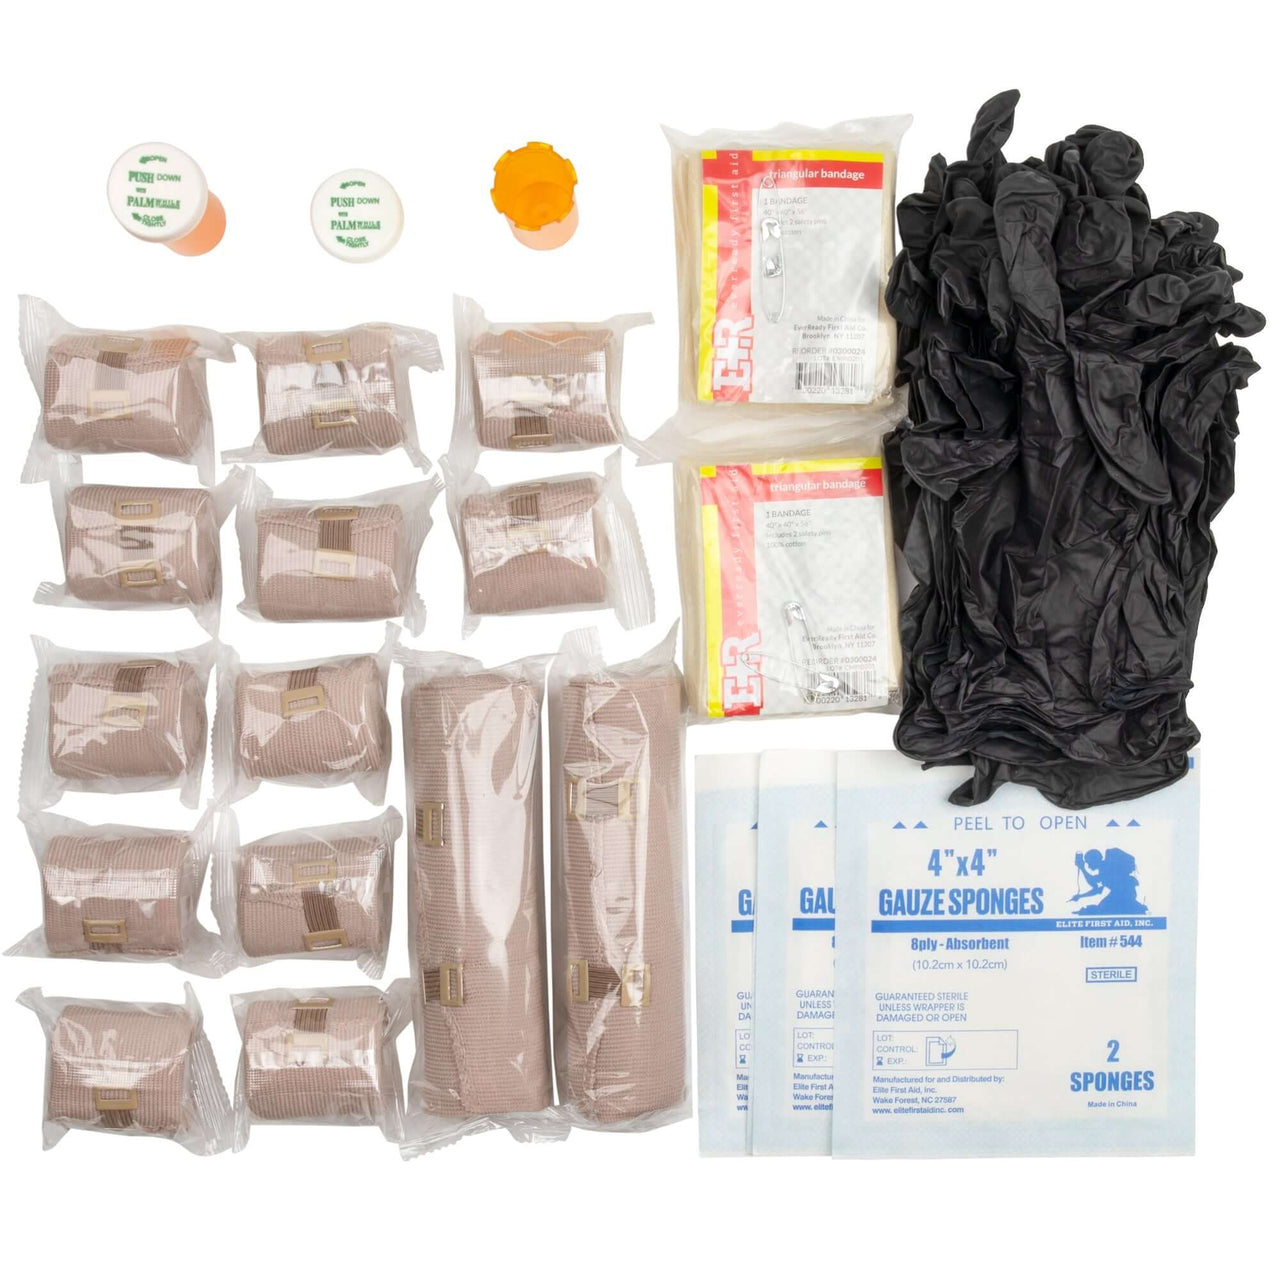 M-17 Medic Bag Complete Field First-Aid Kit